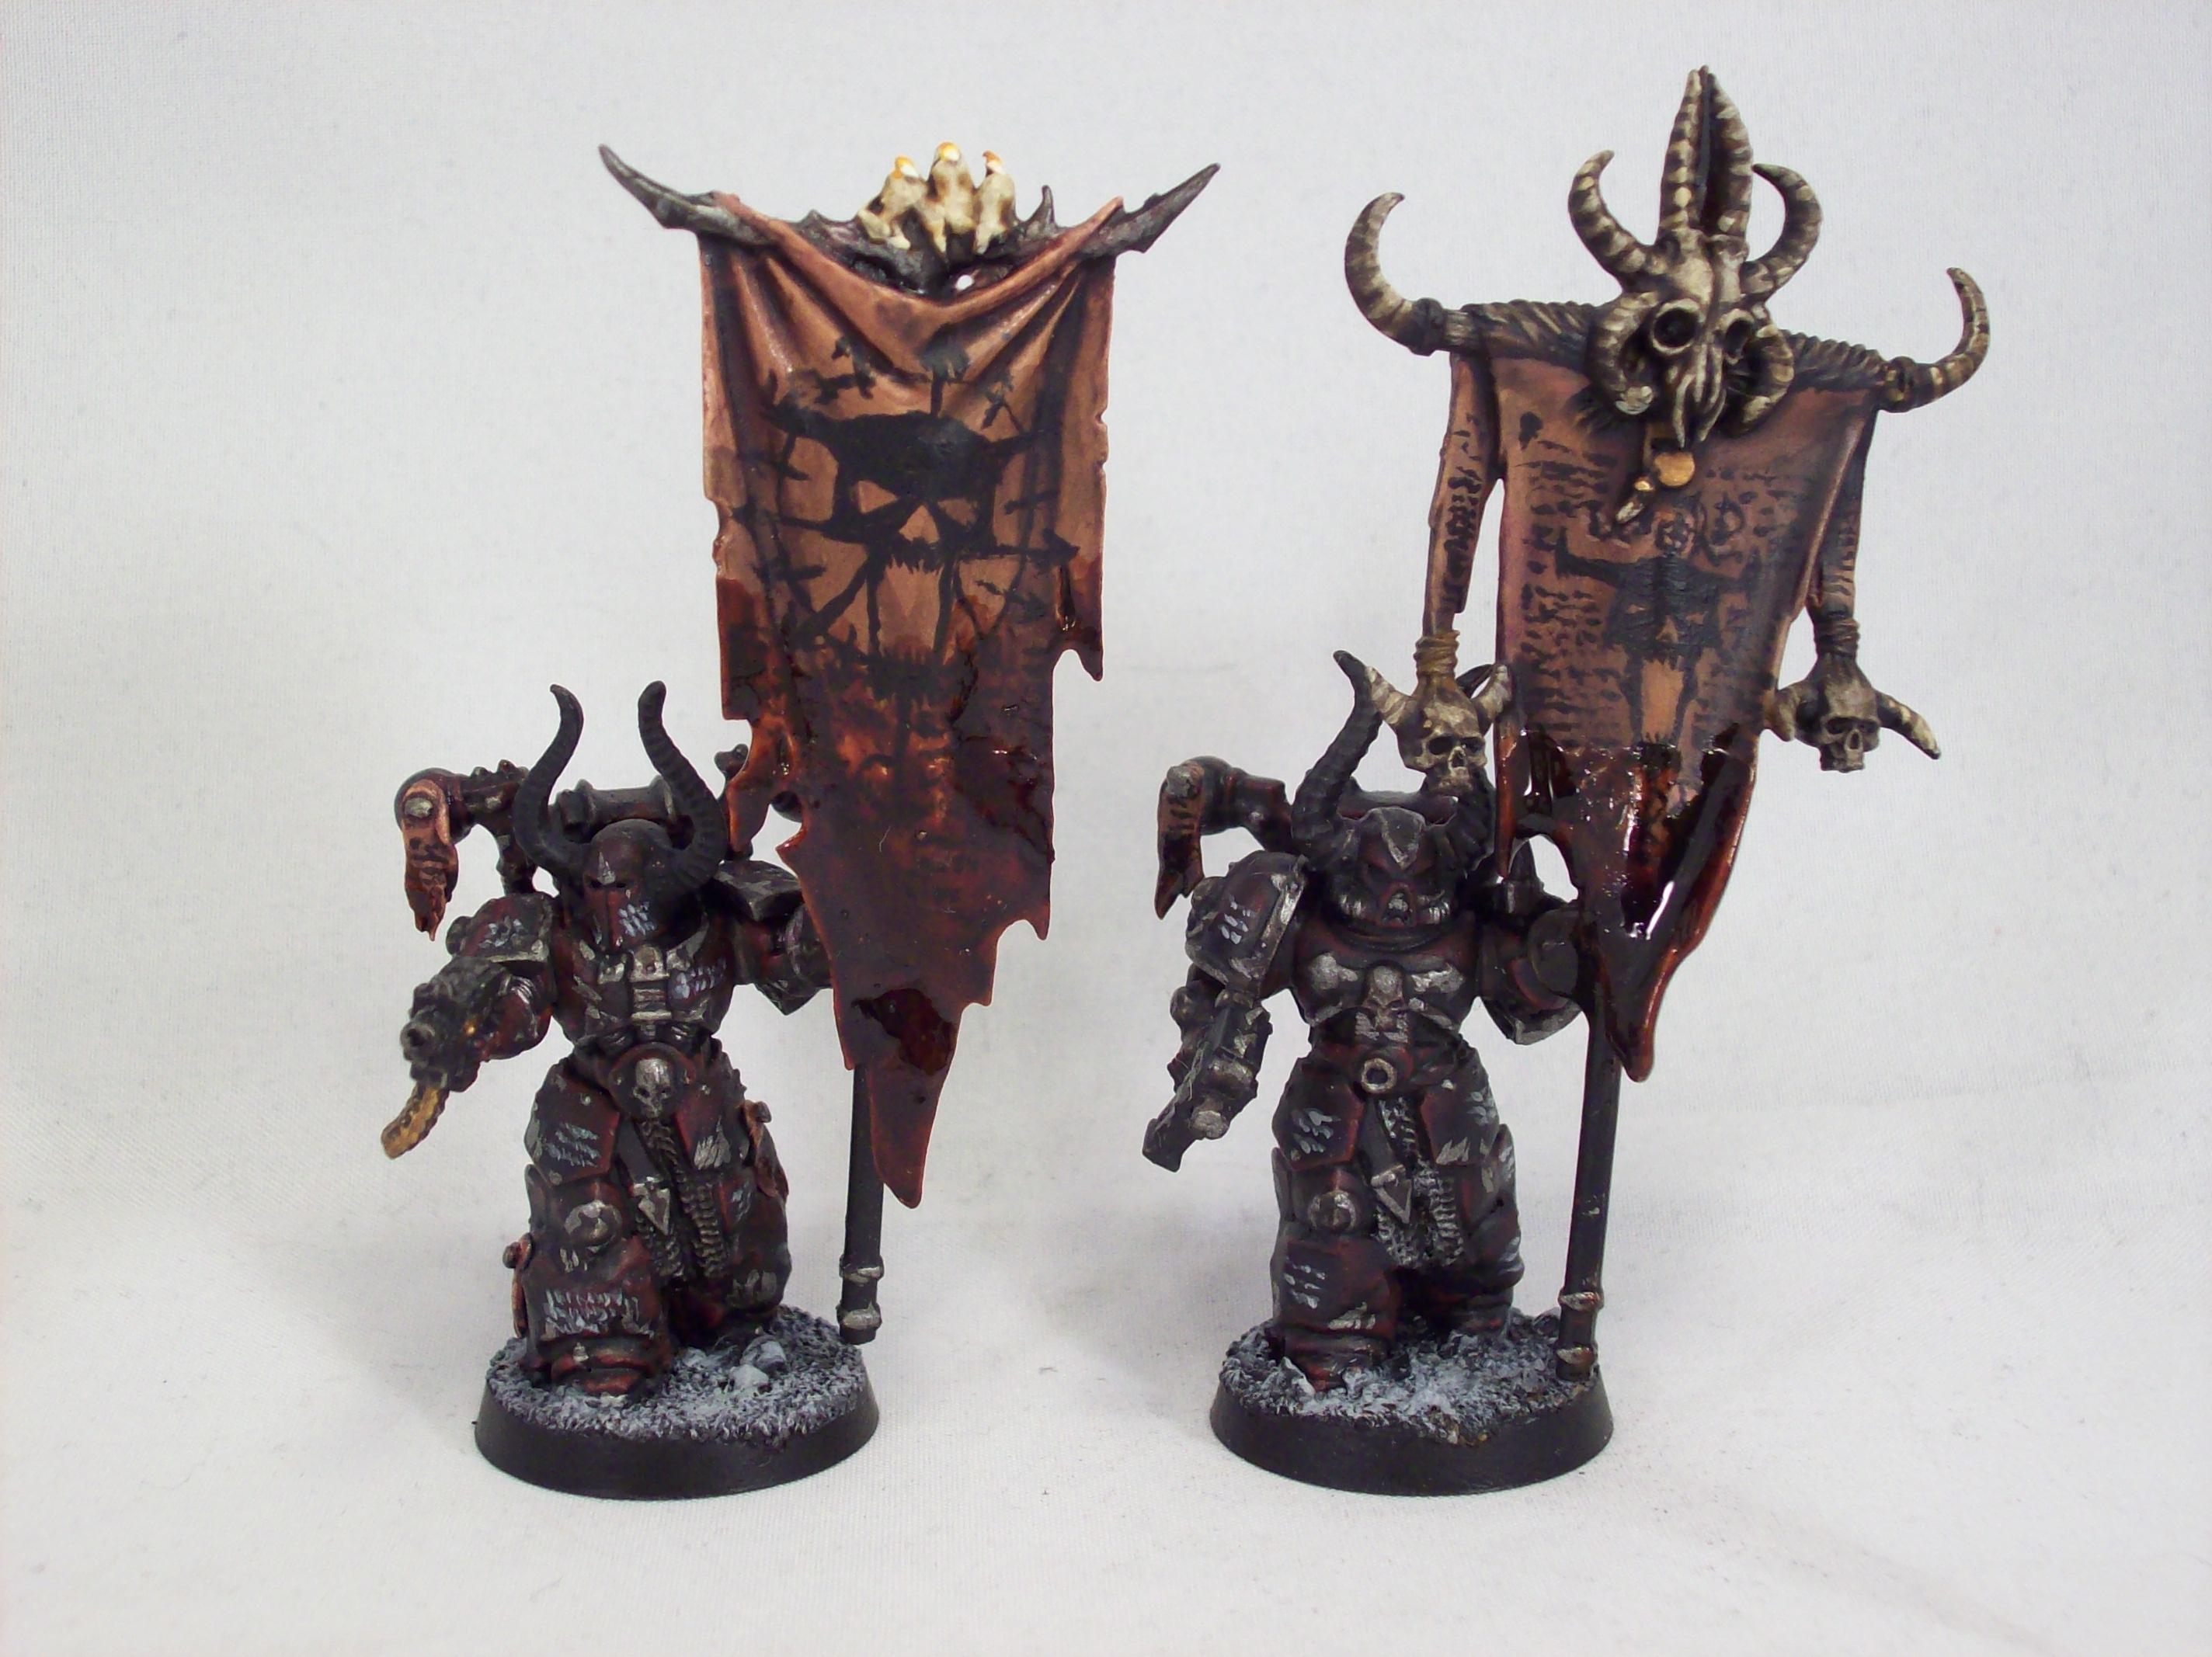 Banner, Chaos, Chaos Space Marines, Games Workshop, Warhammer 40,000, Word Bearers